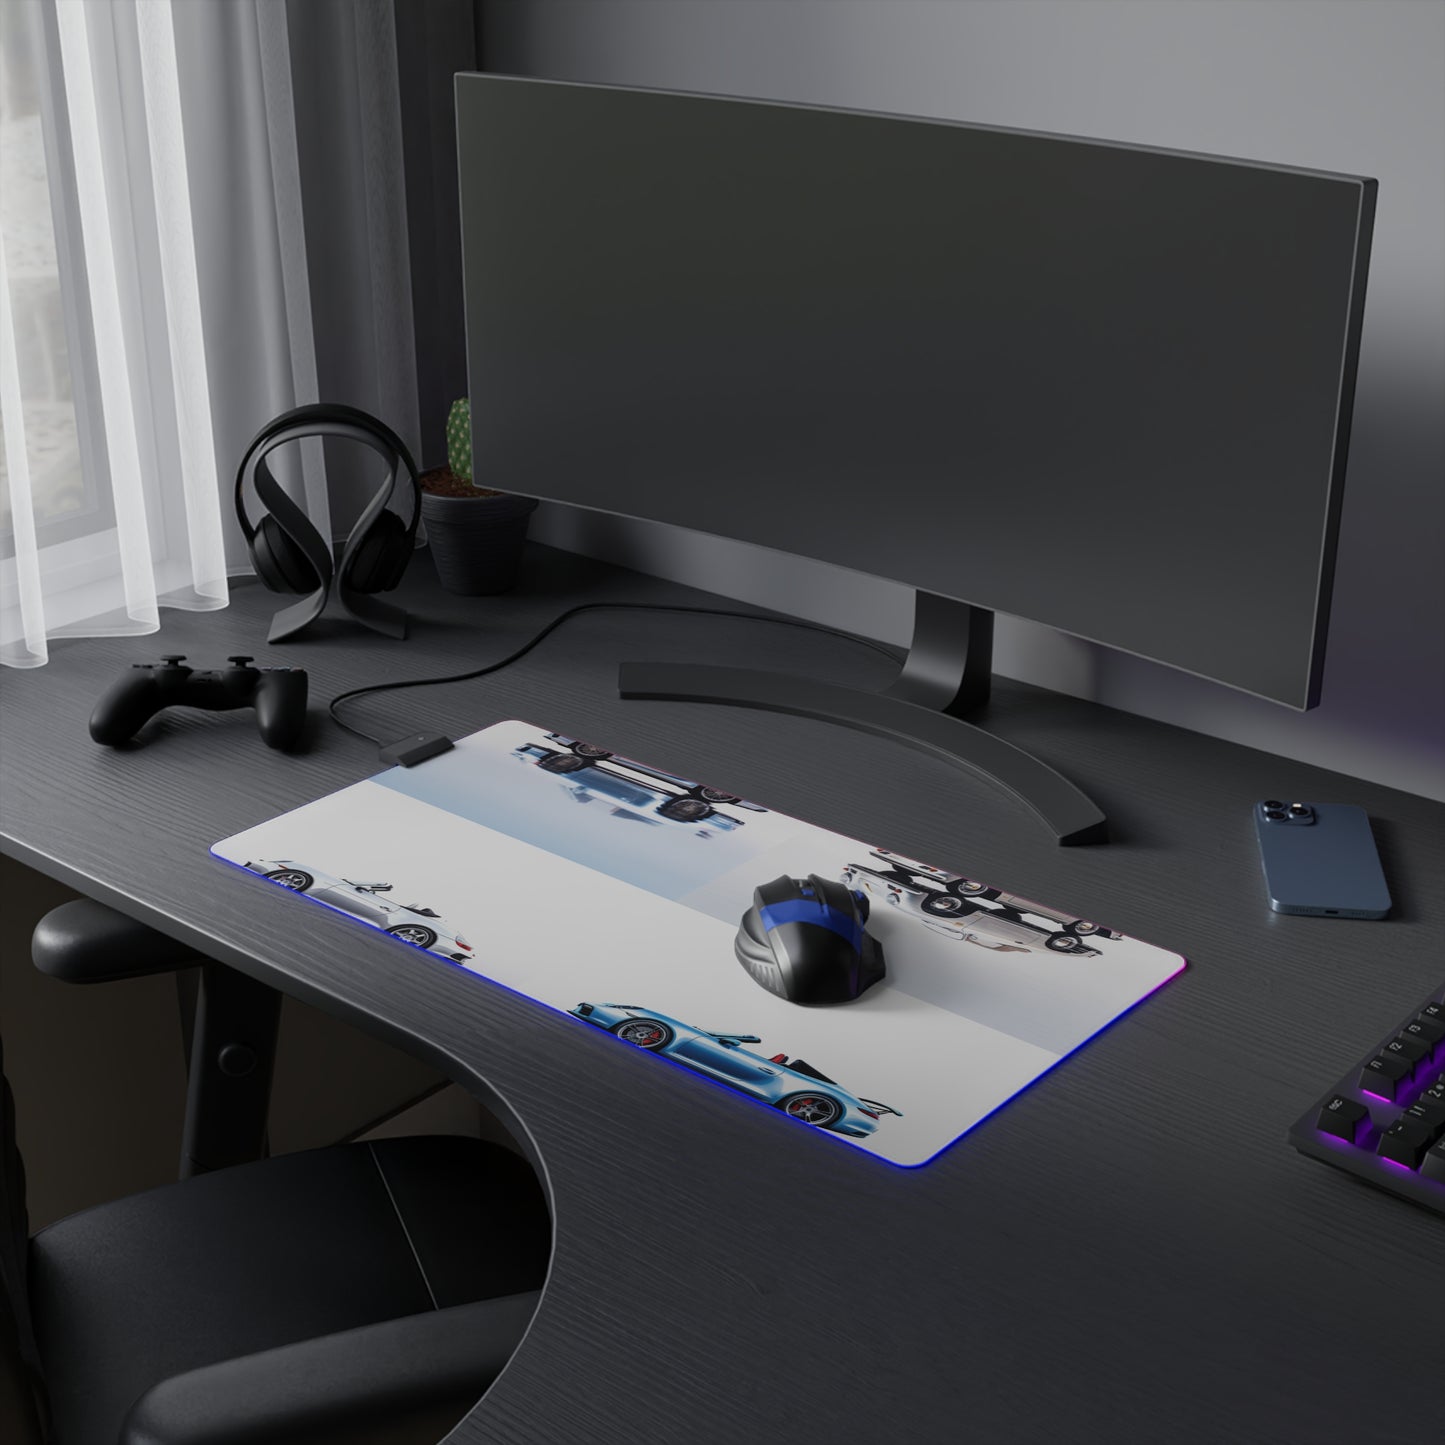 LED Gaming Mouse Pad 911 Speedster on water 5